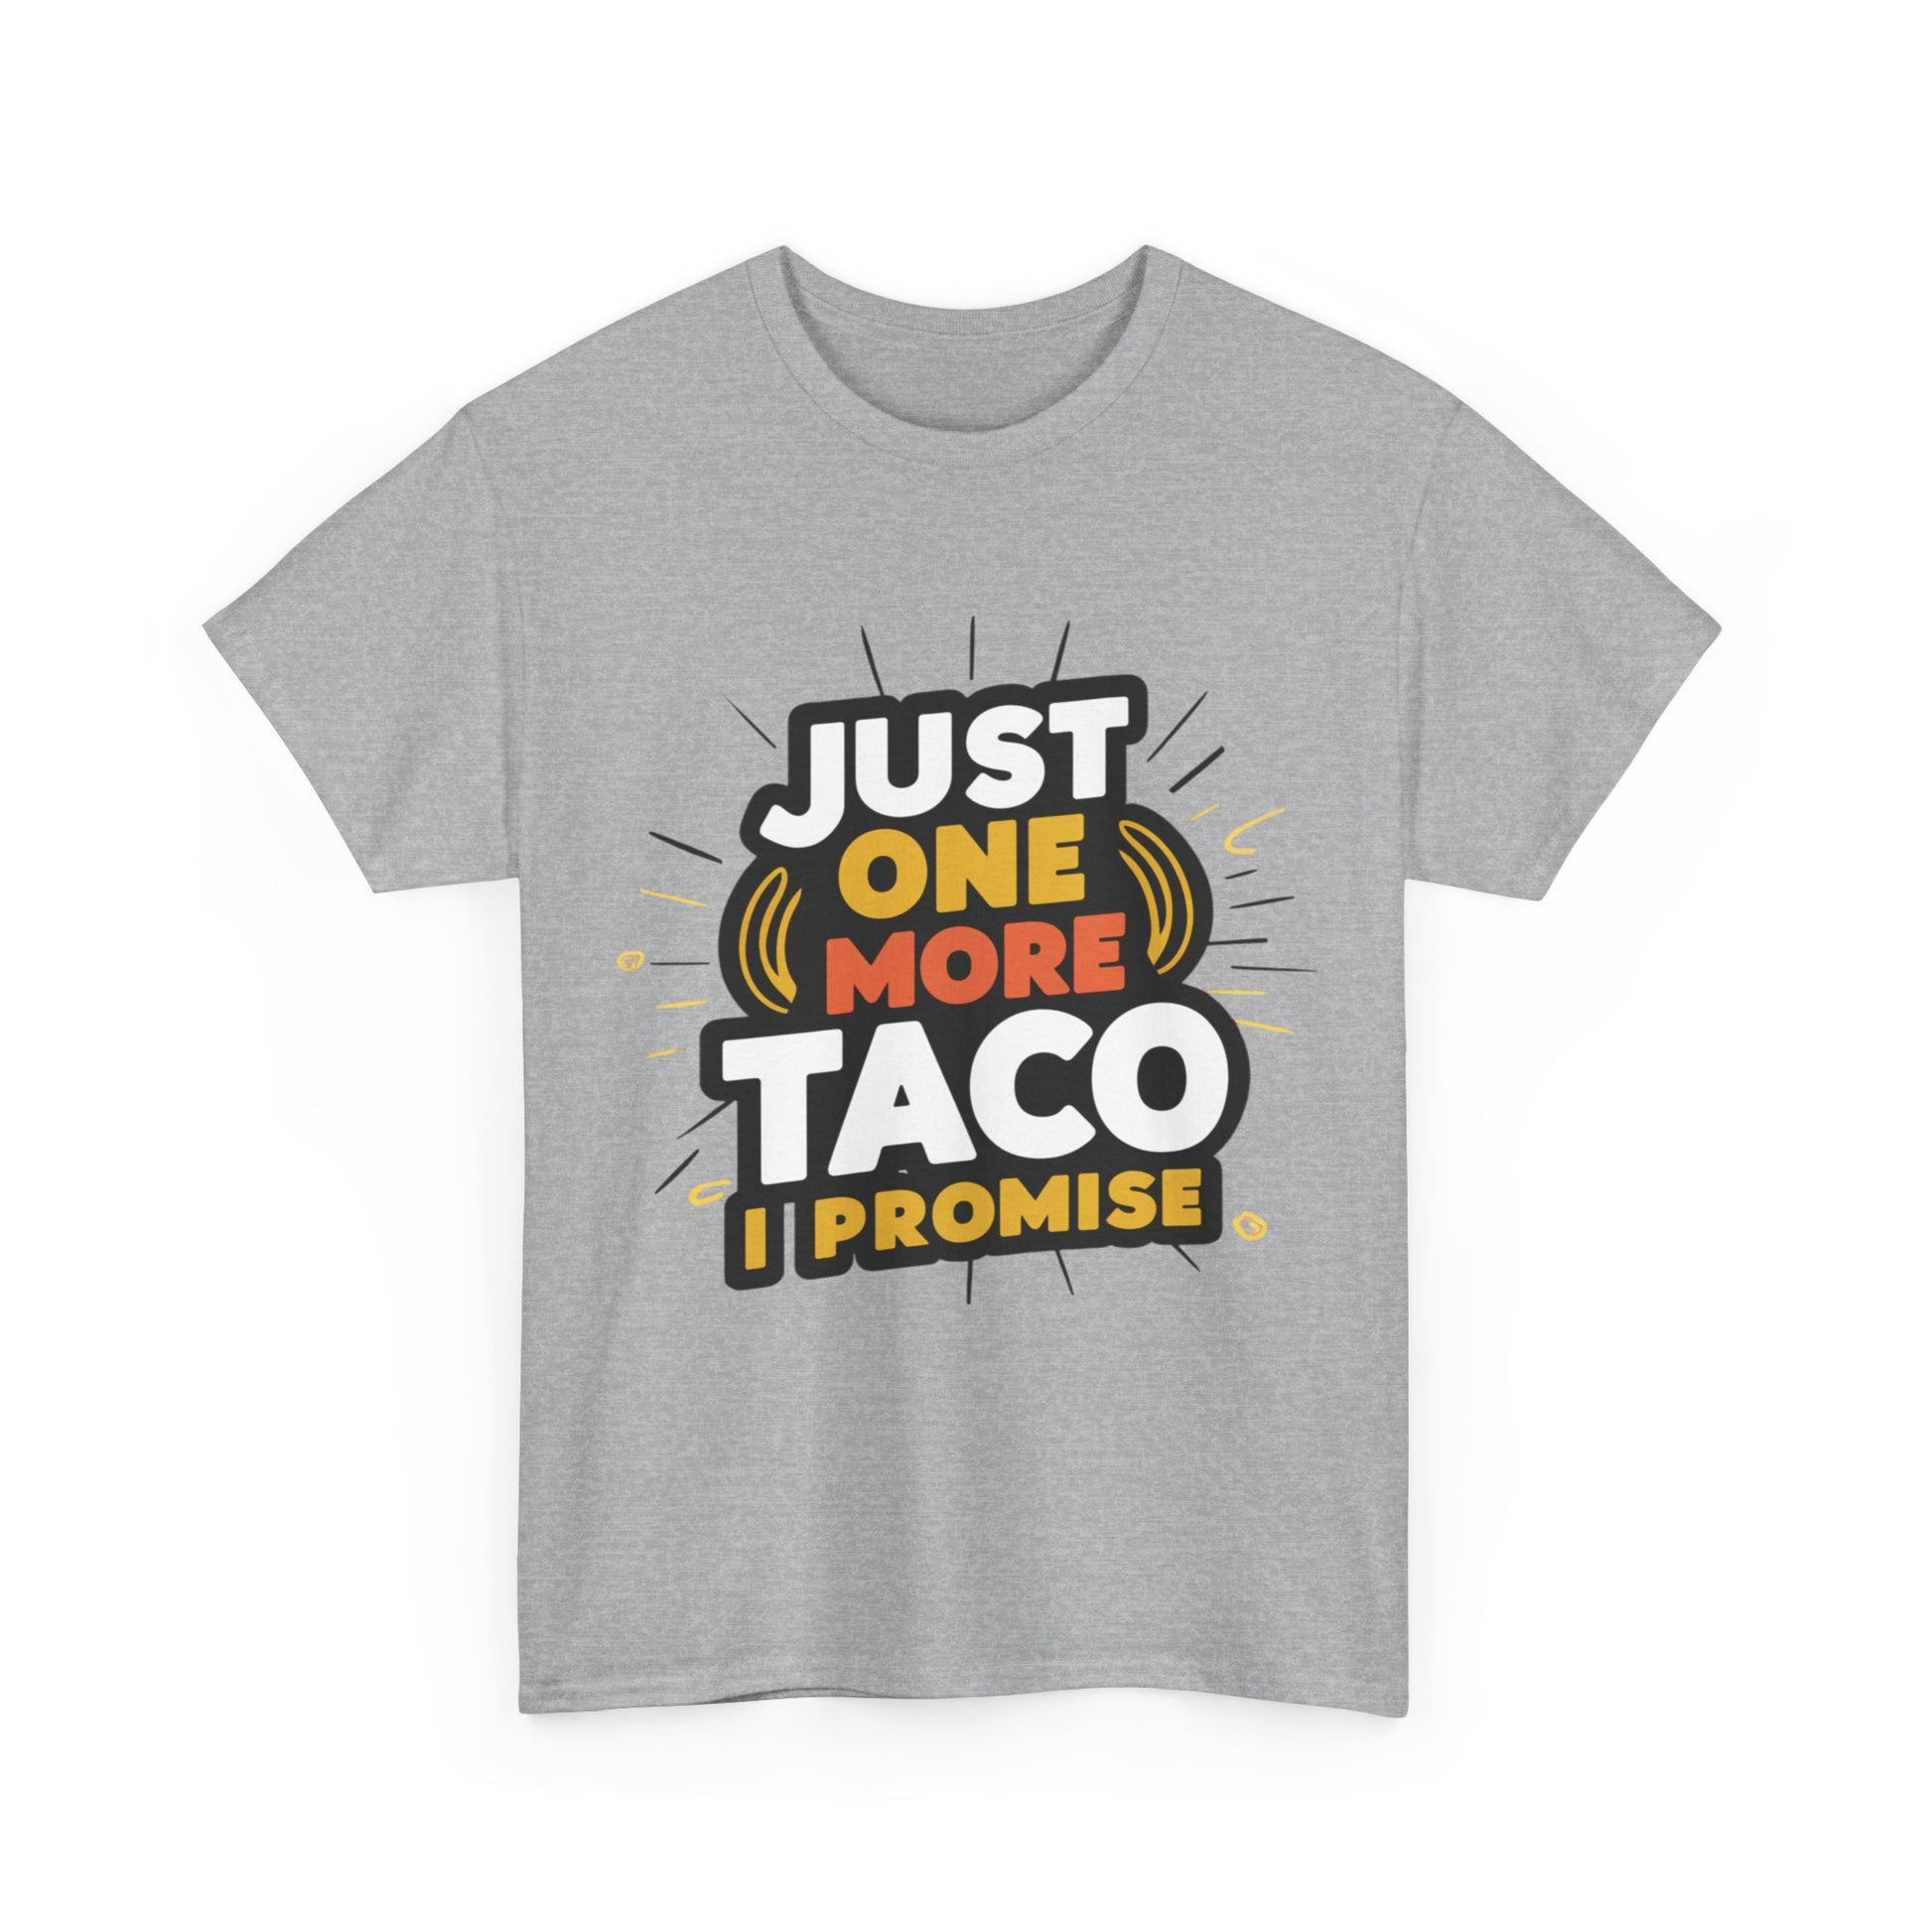 Just One More Taco I Promise Mexican Food Graphic Unisex Heavy Cotton Tee Cotton Funny Humorous Graphic Soft Premium Unisex Men Women Sport Grey T-shirt Birthday Gift-39